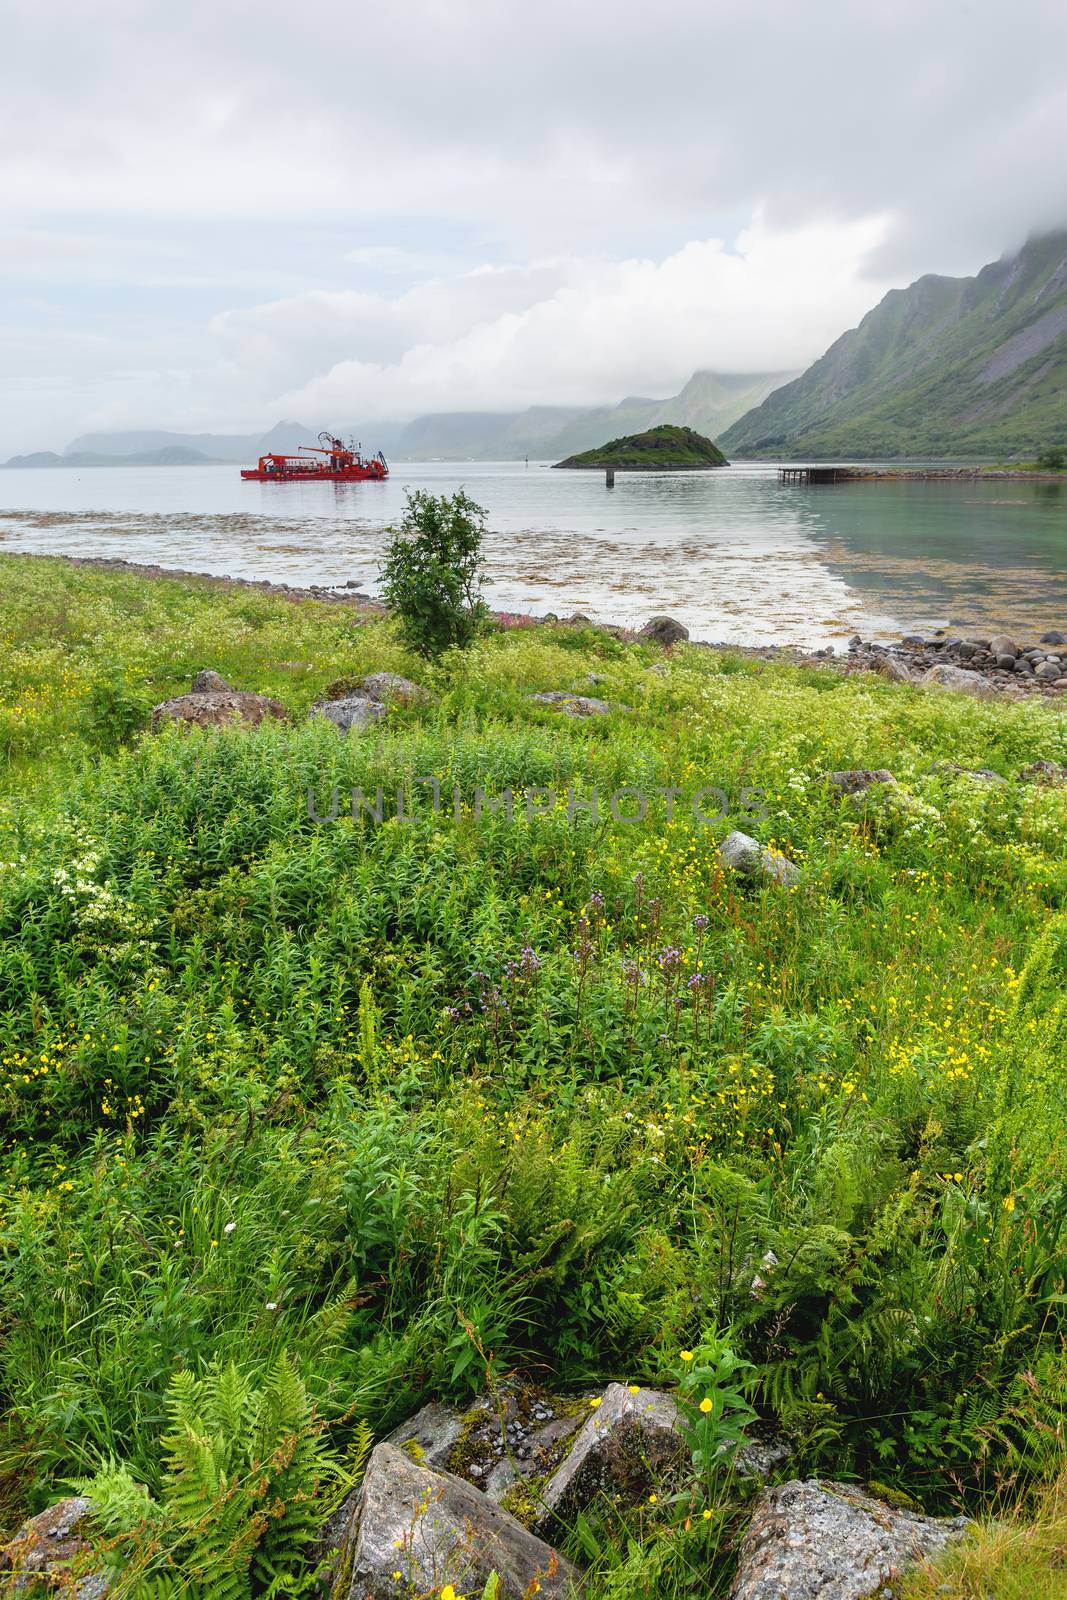 Special purpose ship in the waters of Lofoten archipelago. Typical scandinavian landscape with meadows, mountains and fjords. Lofoten islands, Norway.